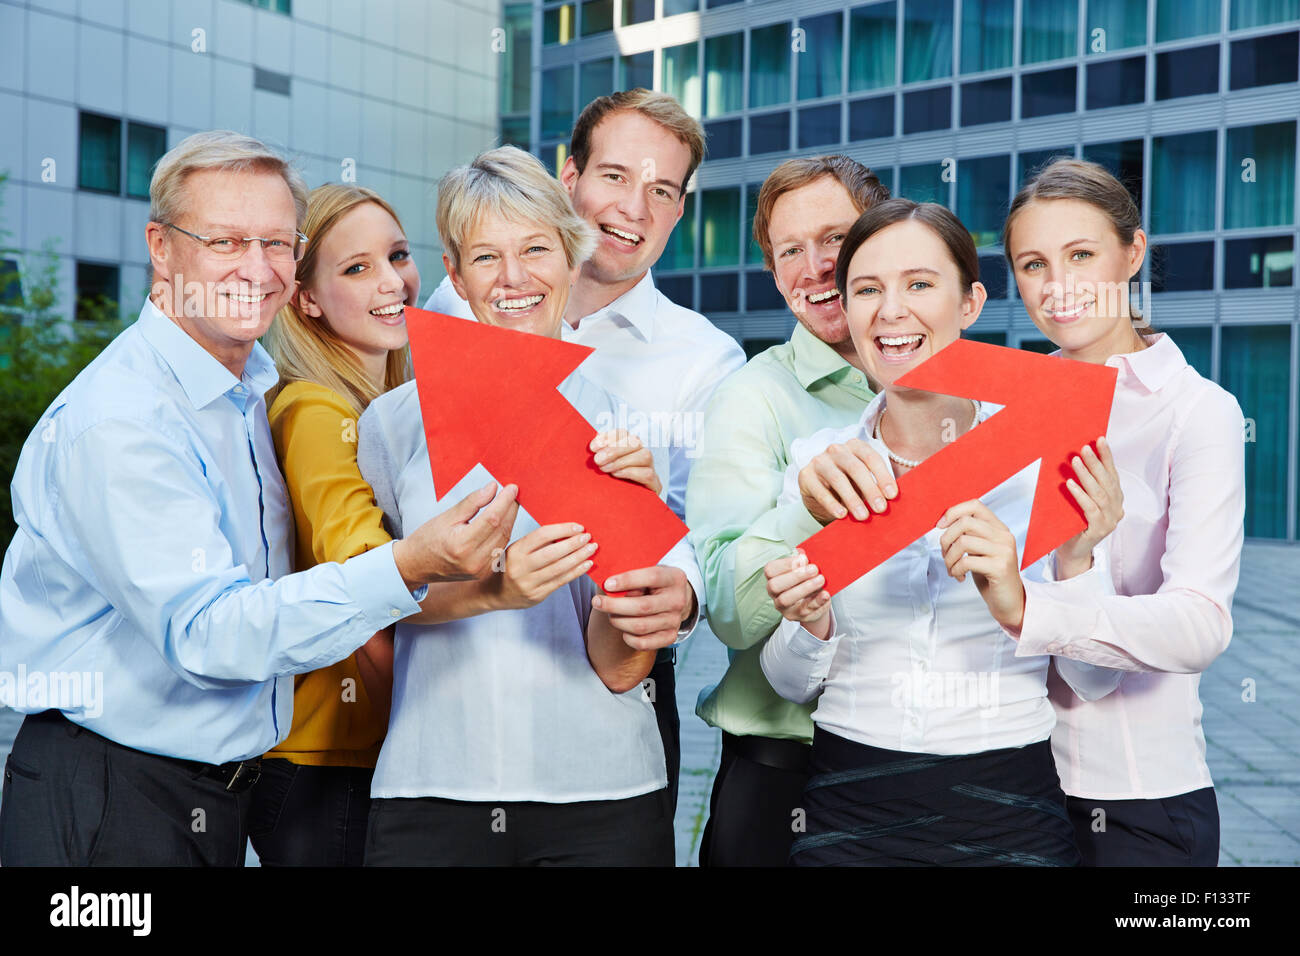 Business team holding big red arrows as symbol for career and success Stock Photo